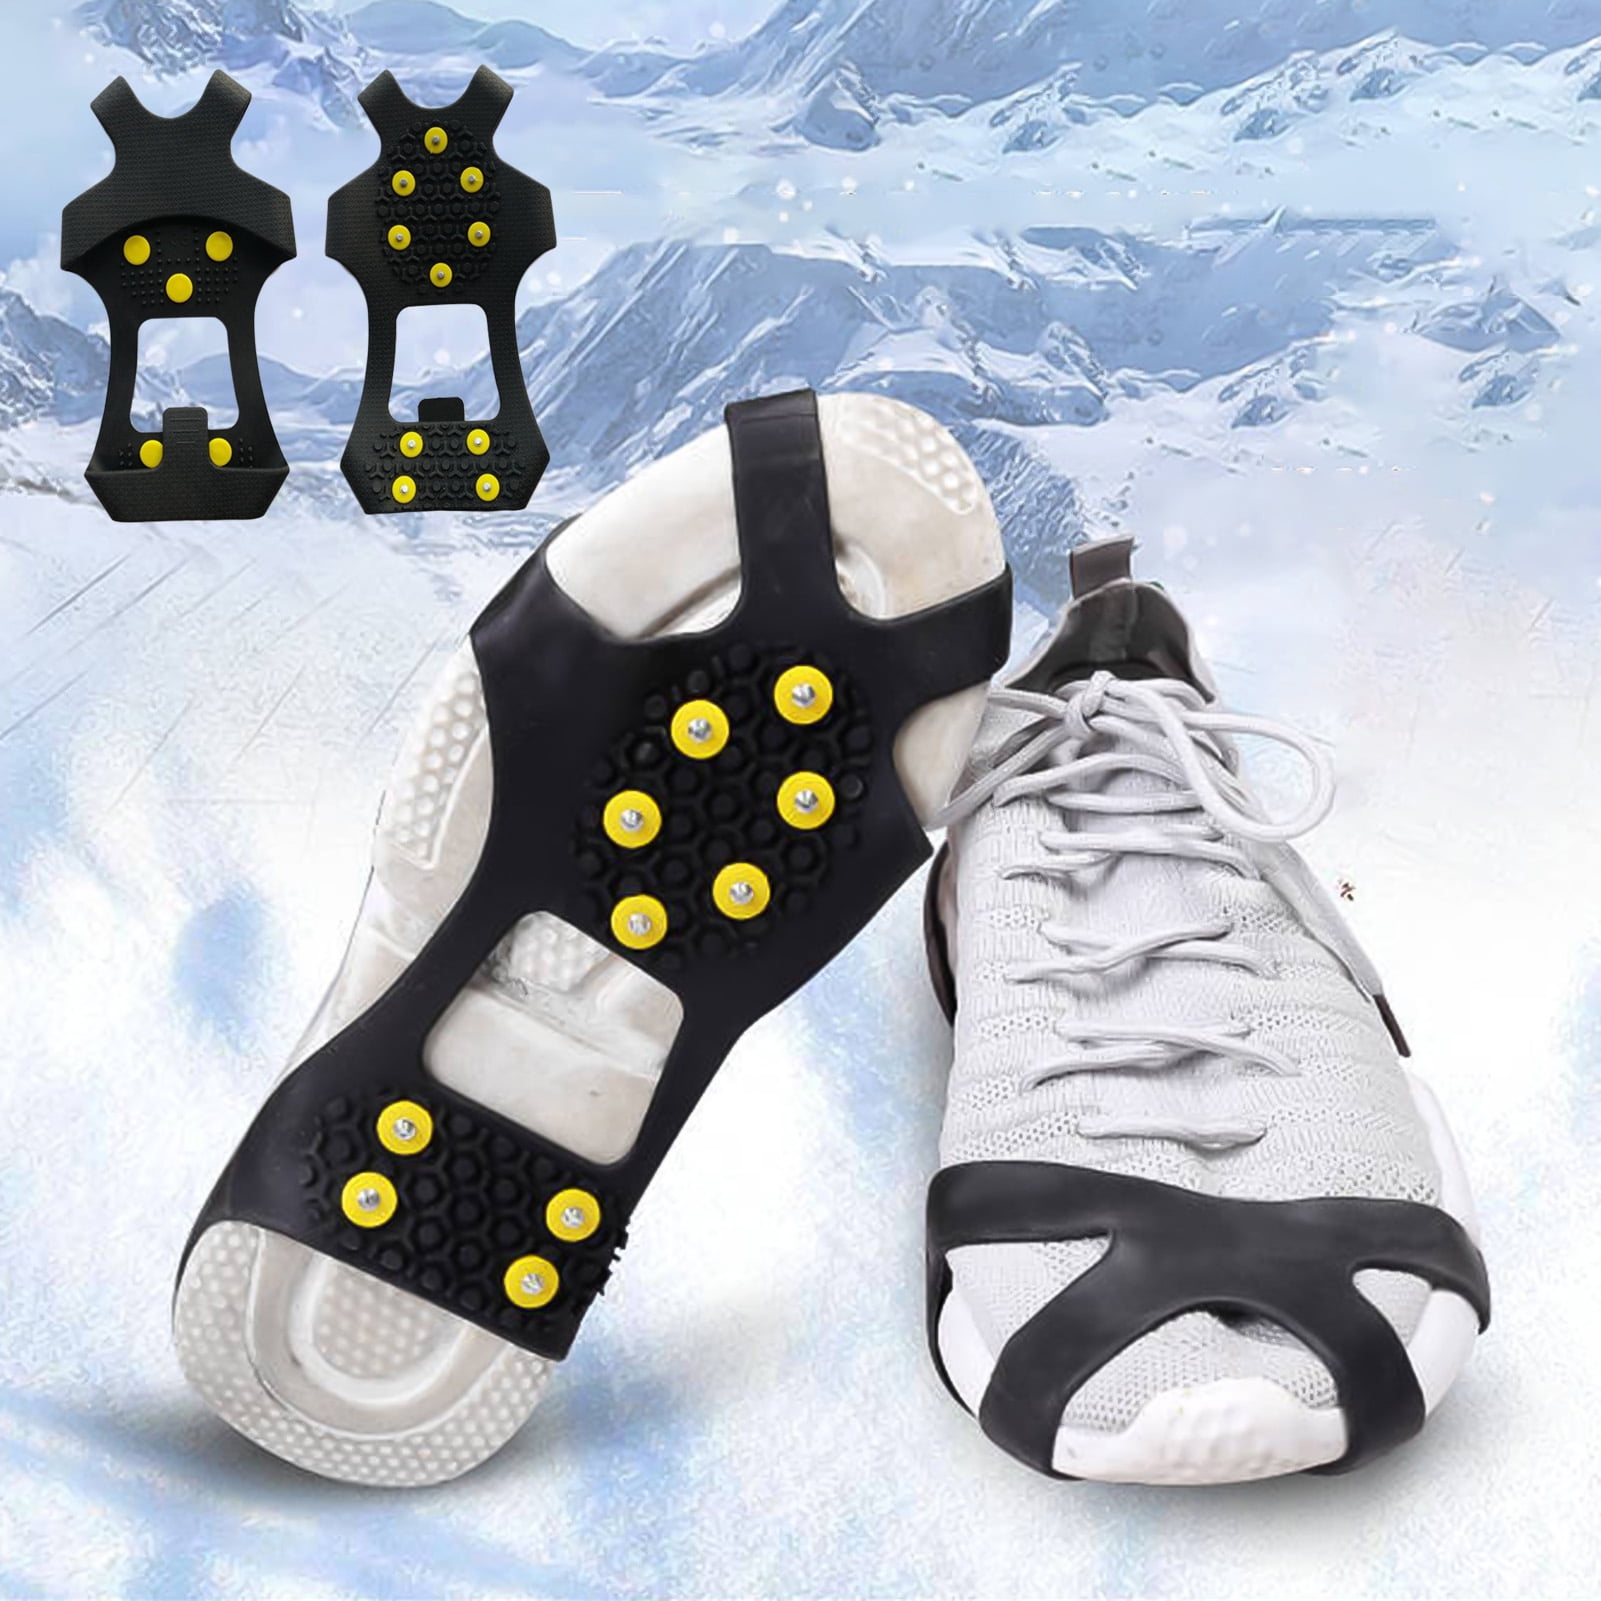 SILANON Ice Snow Cleats for Shoes Boots,Walk Traction Cleats Rubber Crampons Anti Slip 10-Stud Winter Ice Cleat Slip-on Stretch Footwear for Women Men Kids